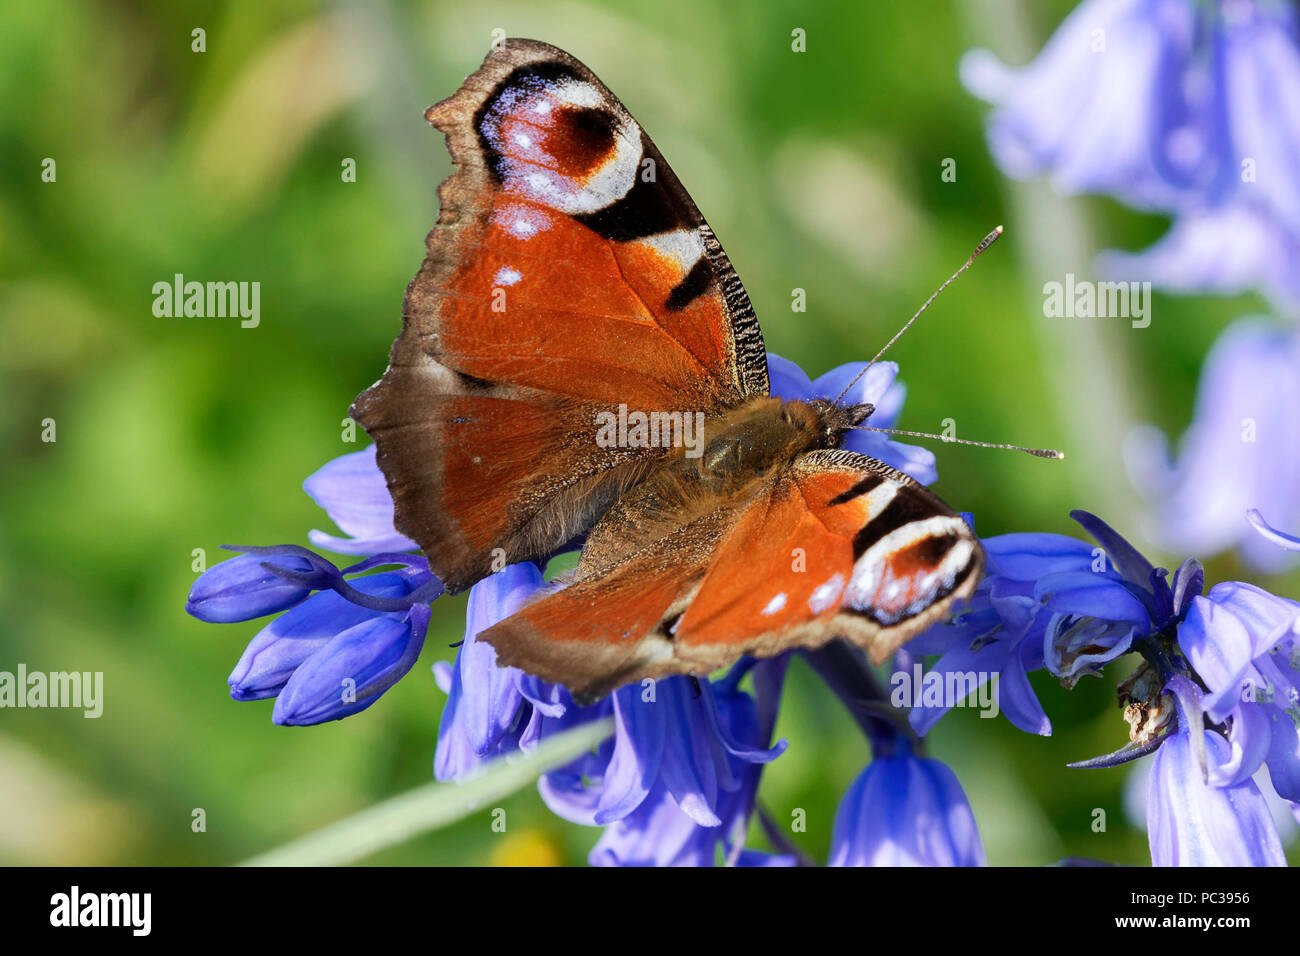 Peacock butterfly feeding on bluebells Stock Photo